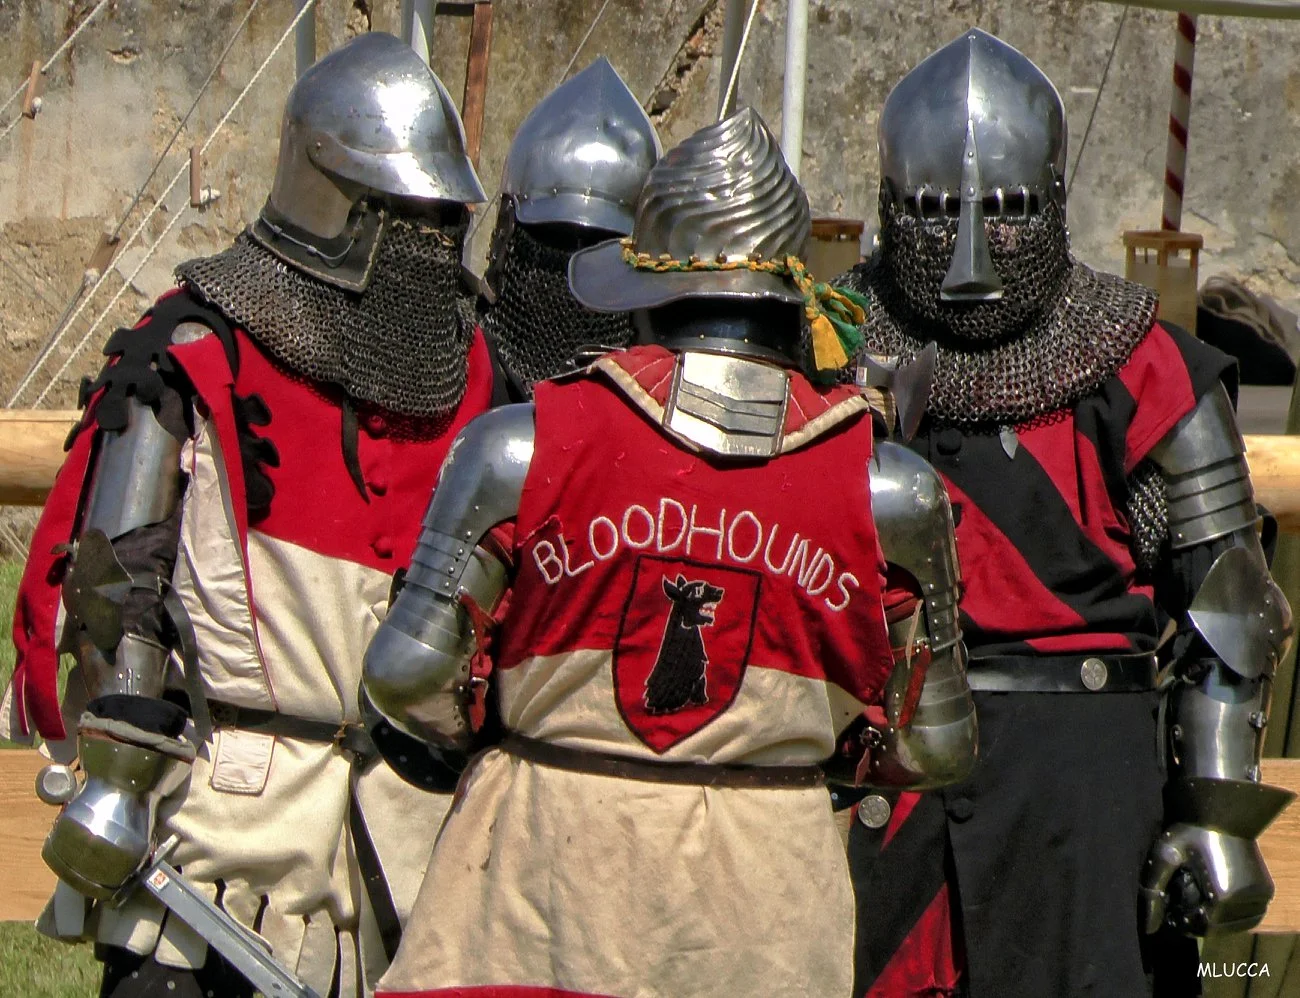 a group of people wearing armor